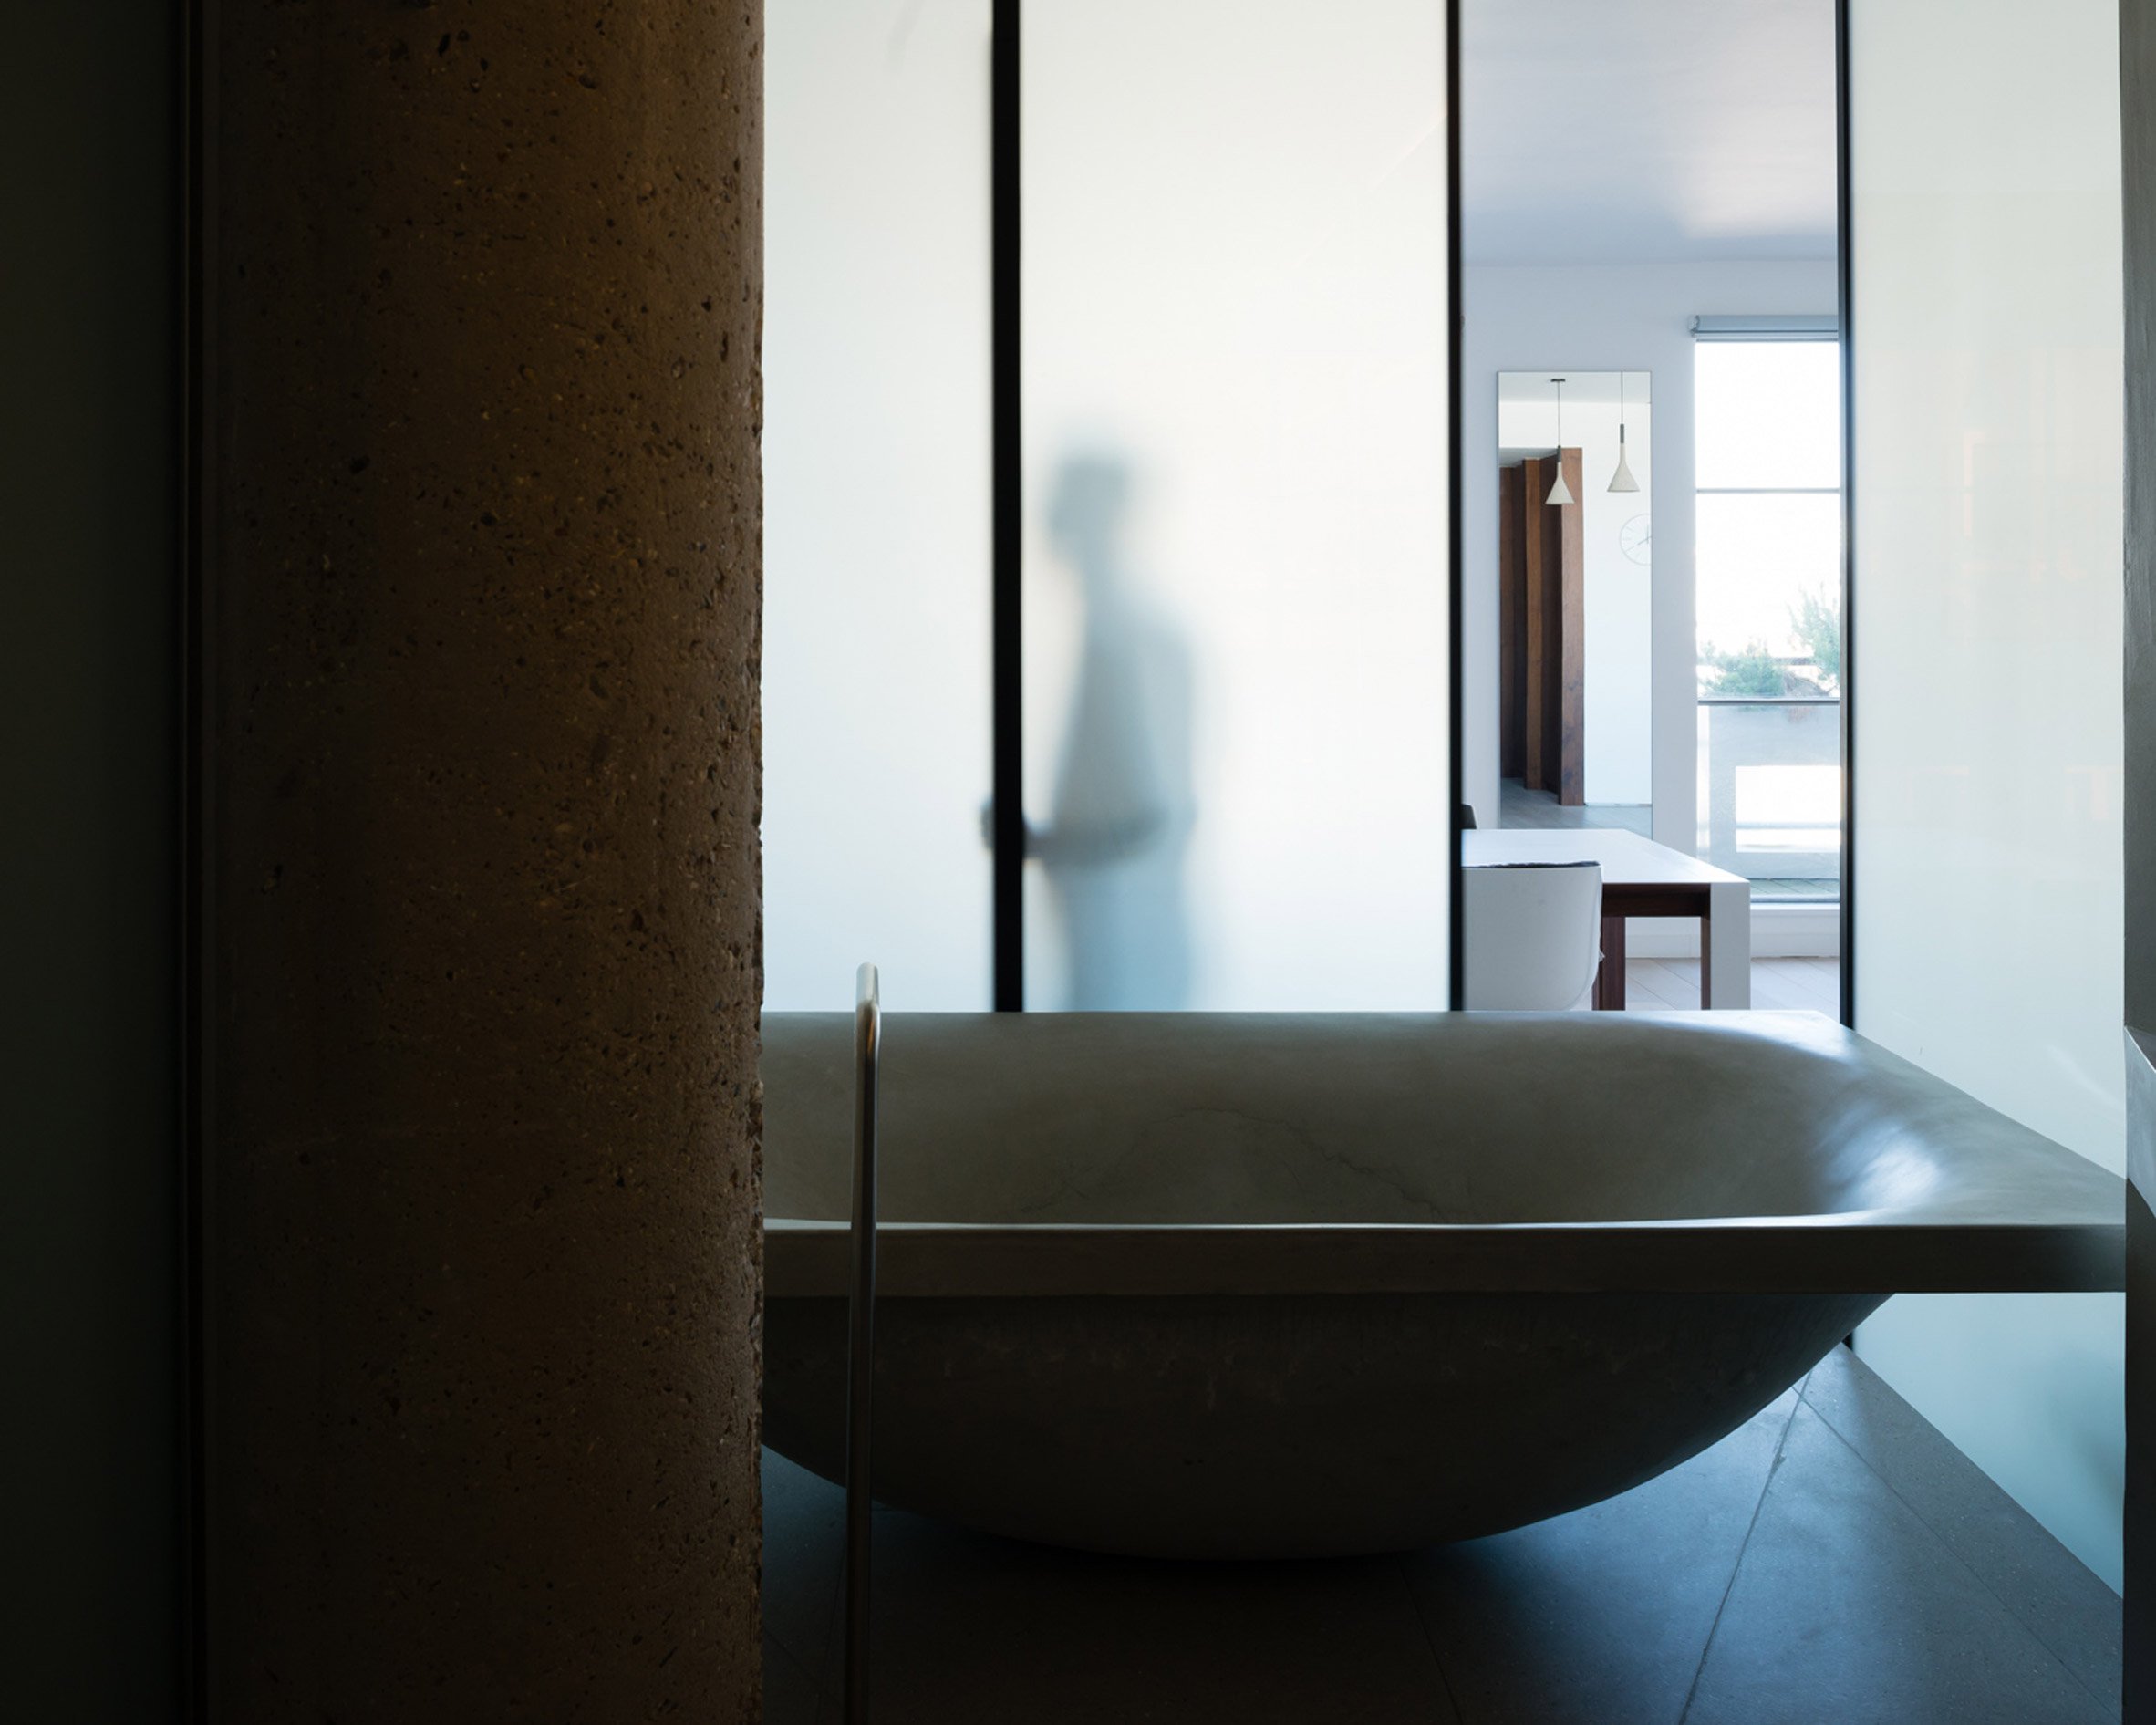 This is the unique sculptural bathtub, which is the focal point of the whole apartment